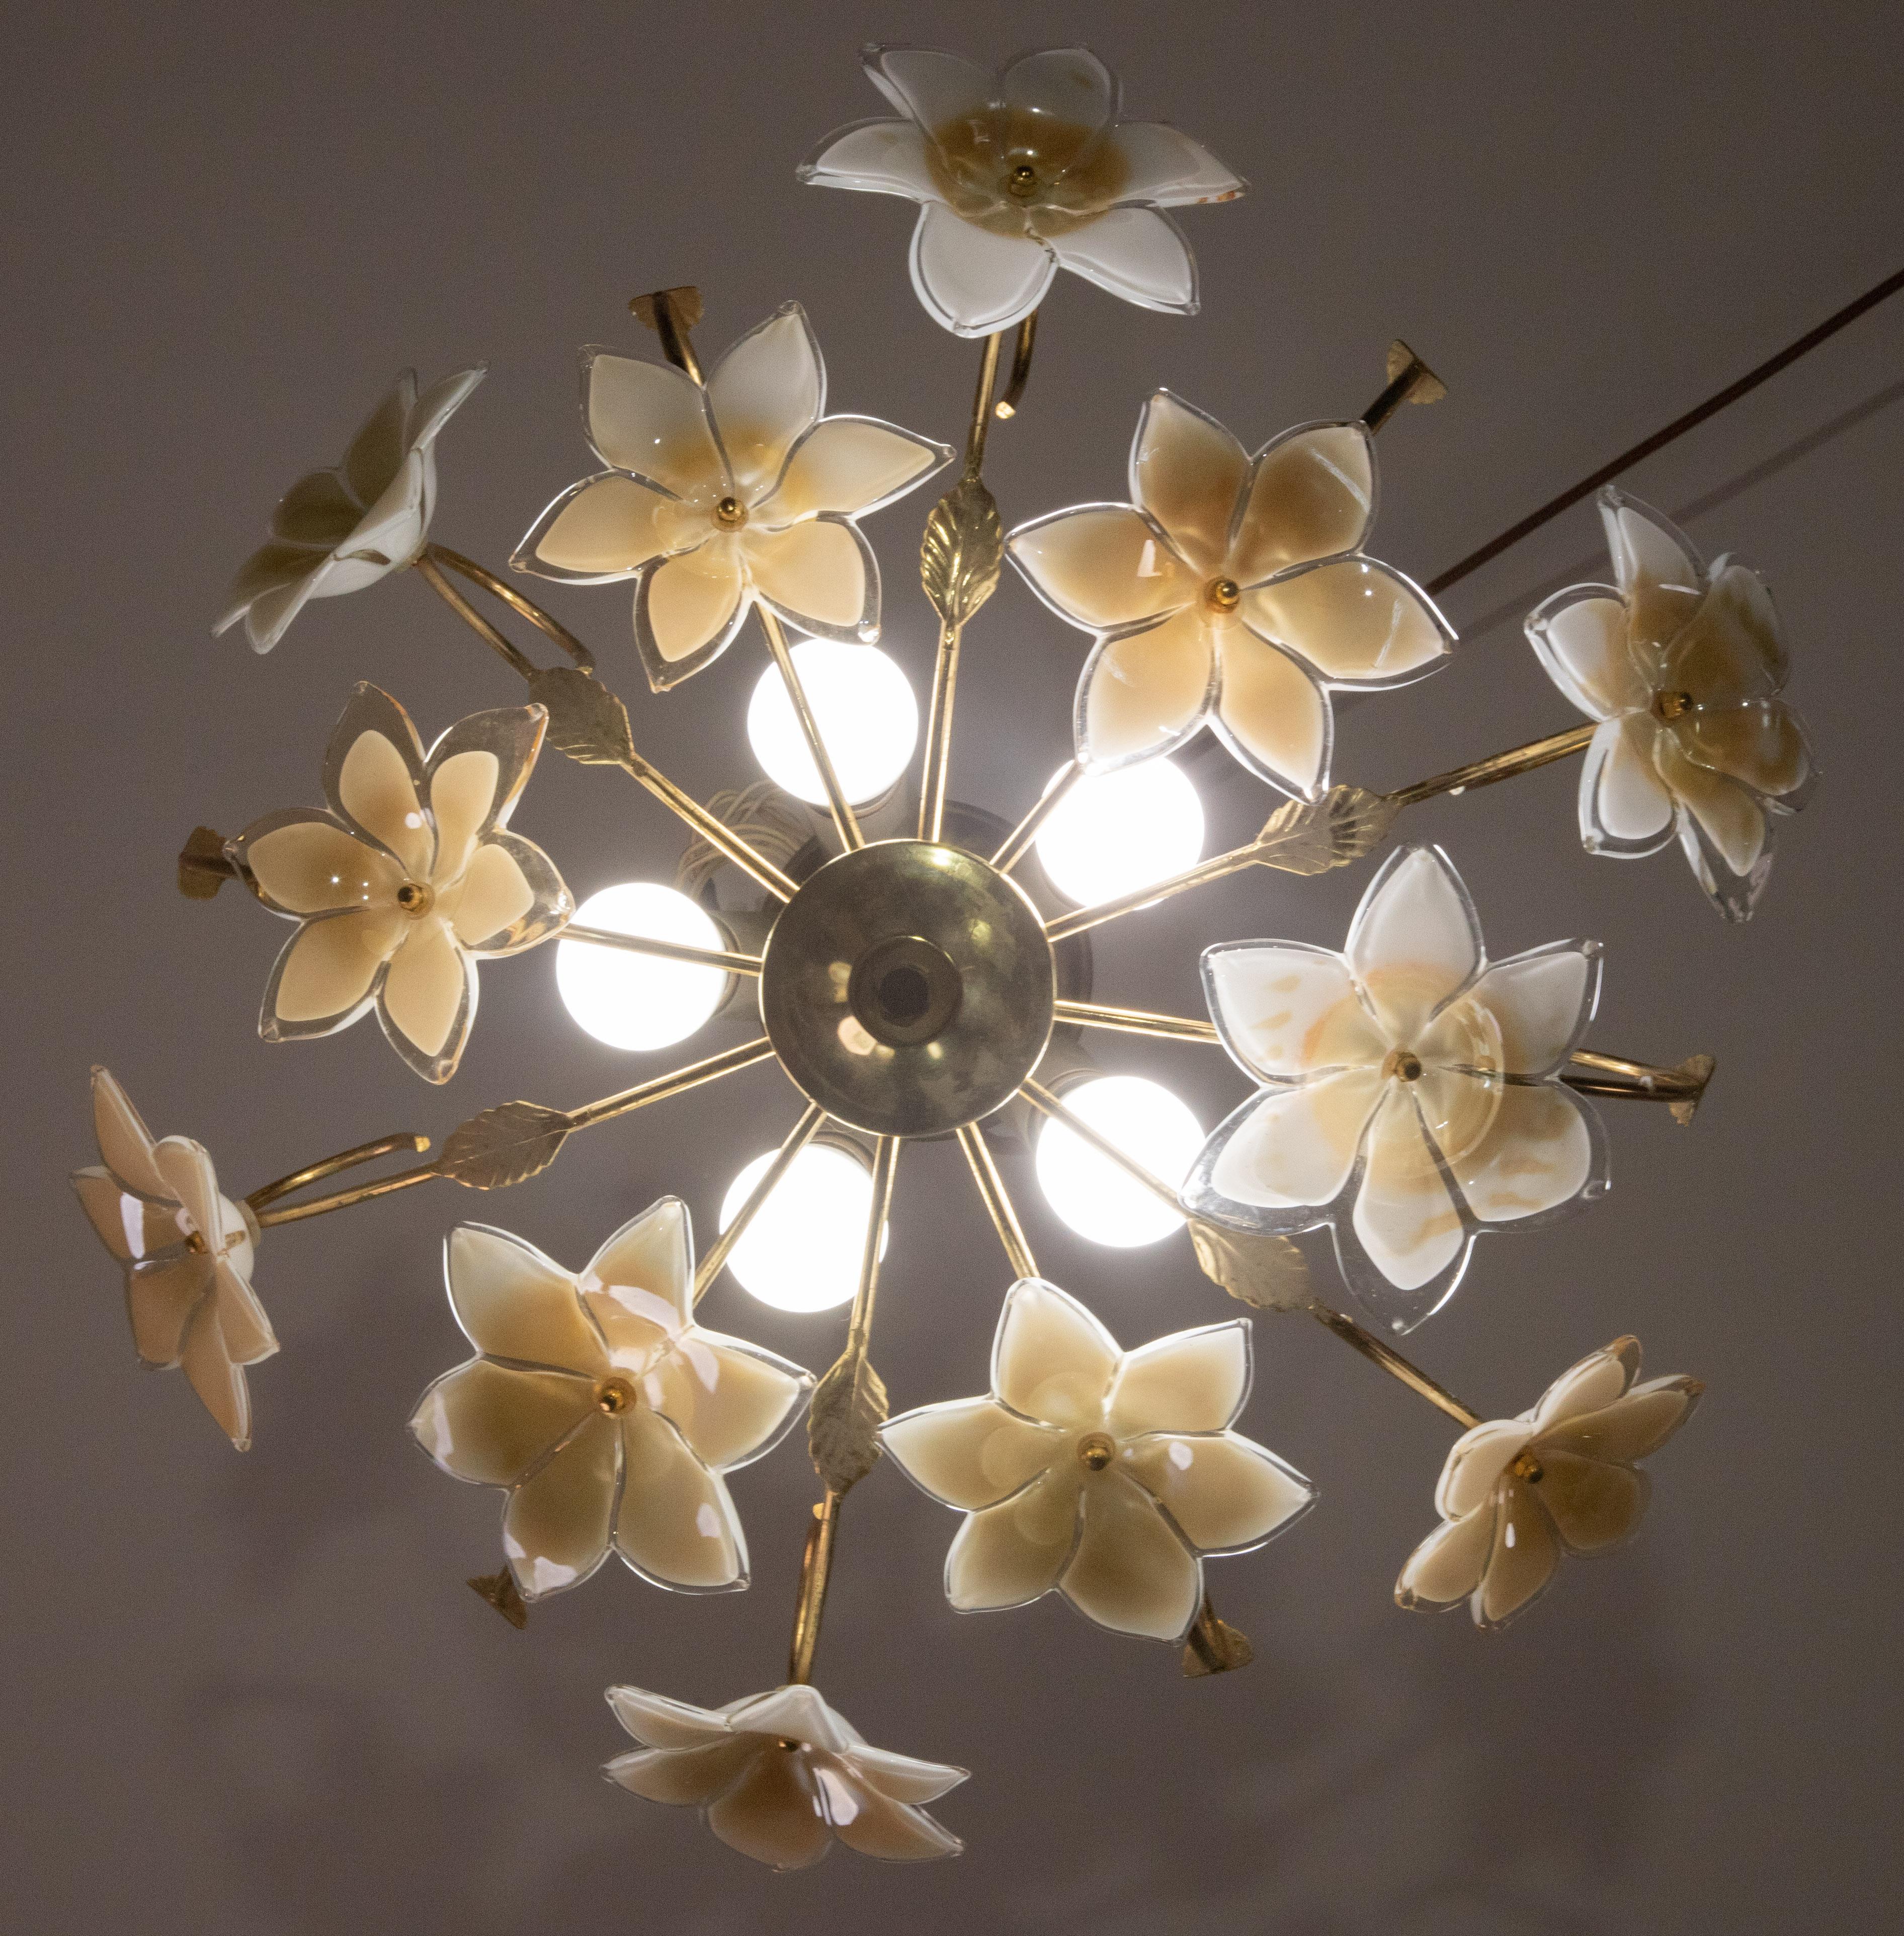 Gorgeous orange iridescent flowers Murano ceiling light.
The ceiling light mounts 5 lamp holders with E14 socket, posiblee to switch for USA.
Very good condition of the flowers, some signs of time on the structure.